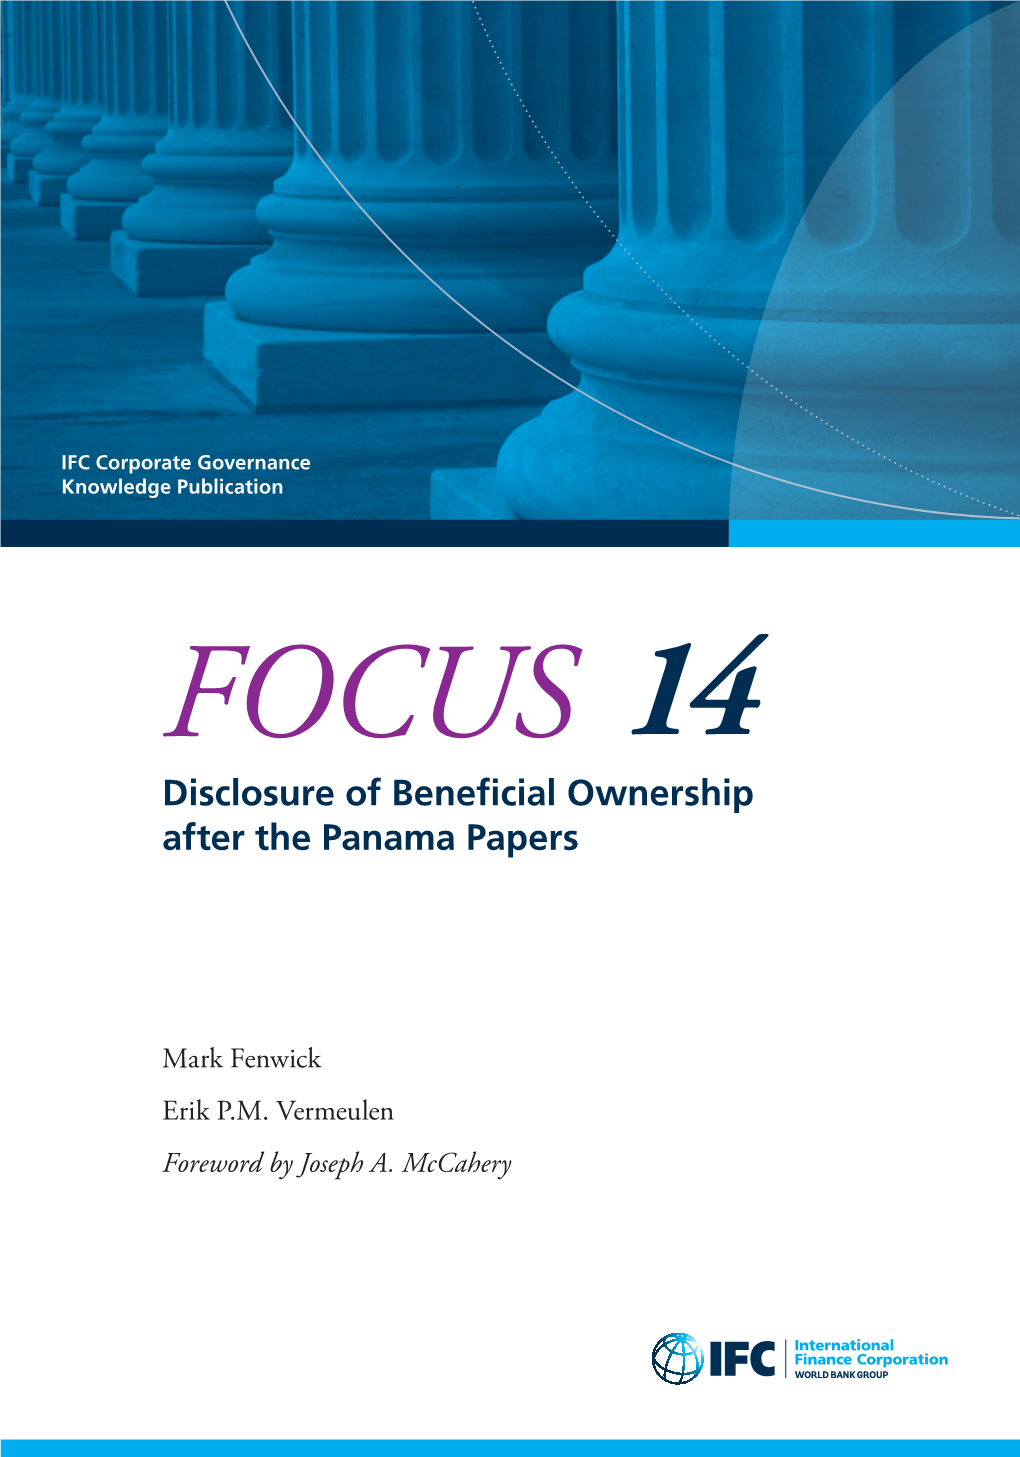 Disclosure of Beneficial Ownership After the Panama Papers